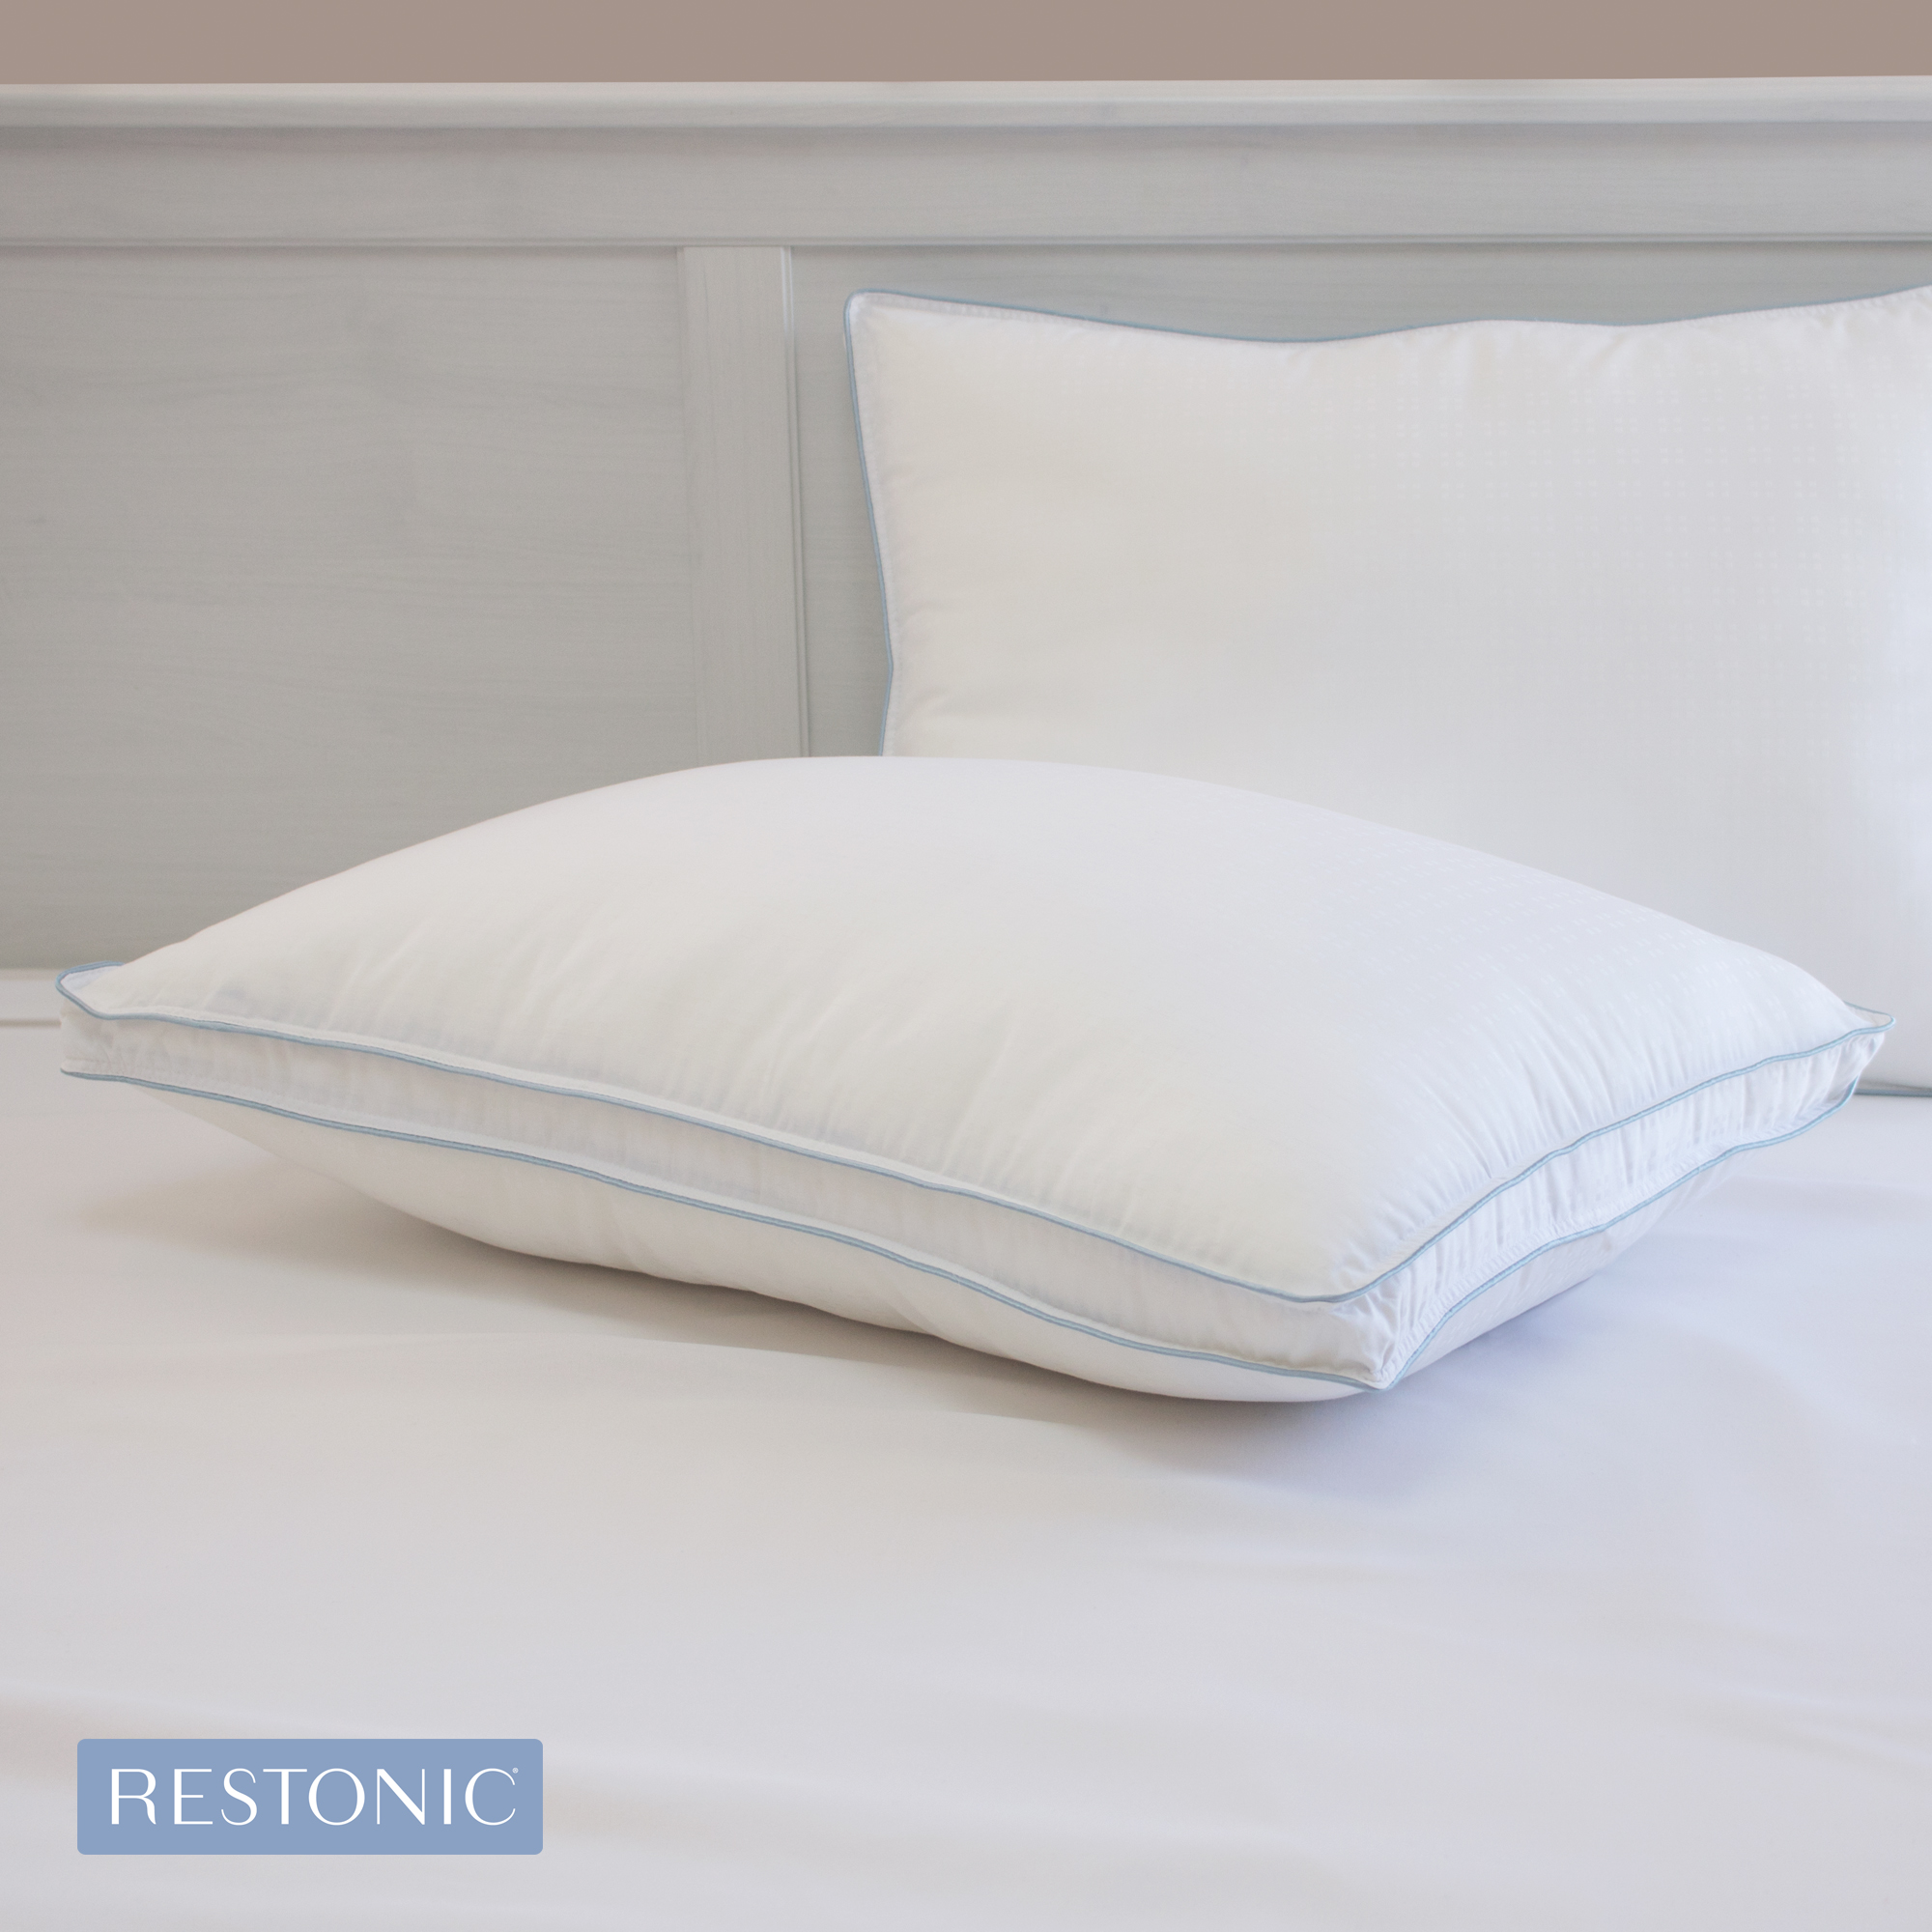 Restonic TempaGel Max Cooling Pillows